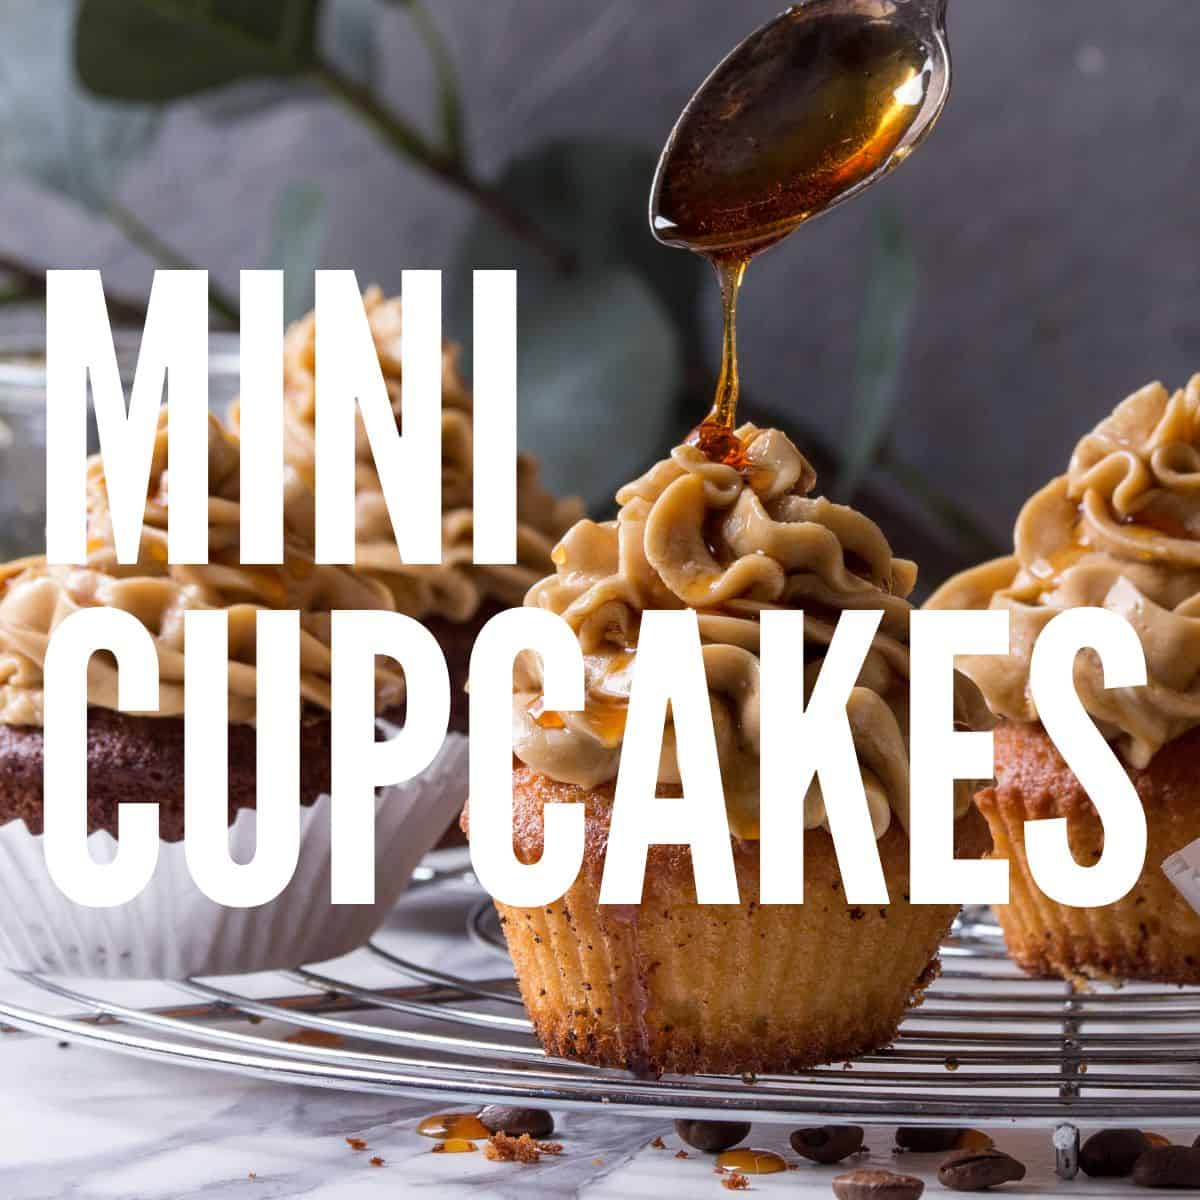 Decorated mini cupcakes with a pouring spoon and text